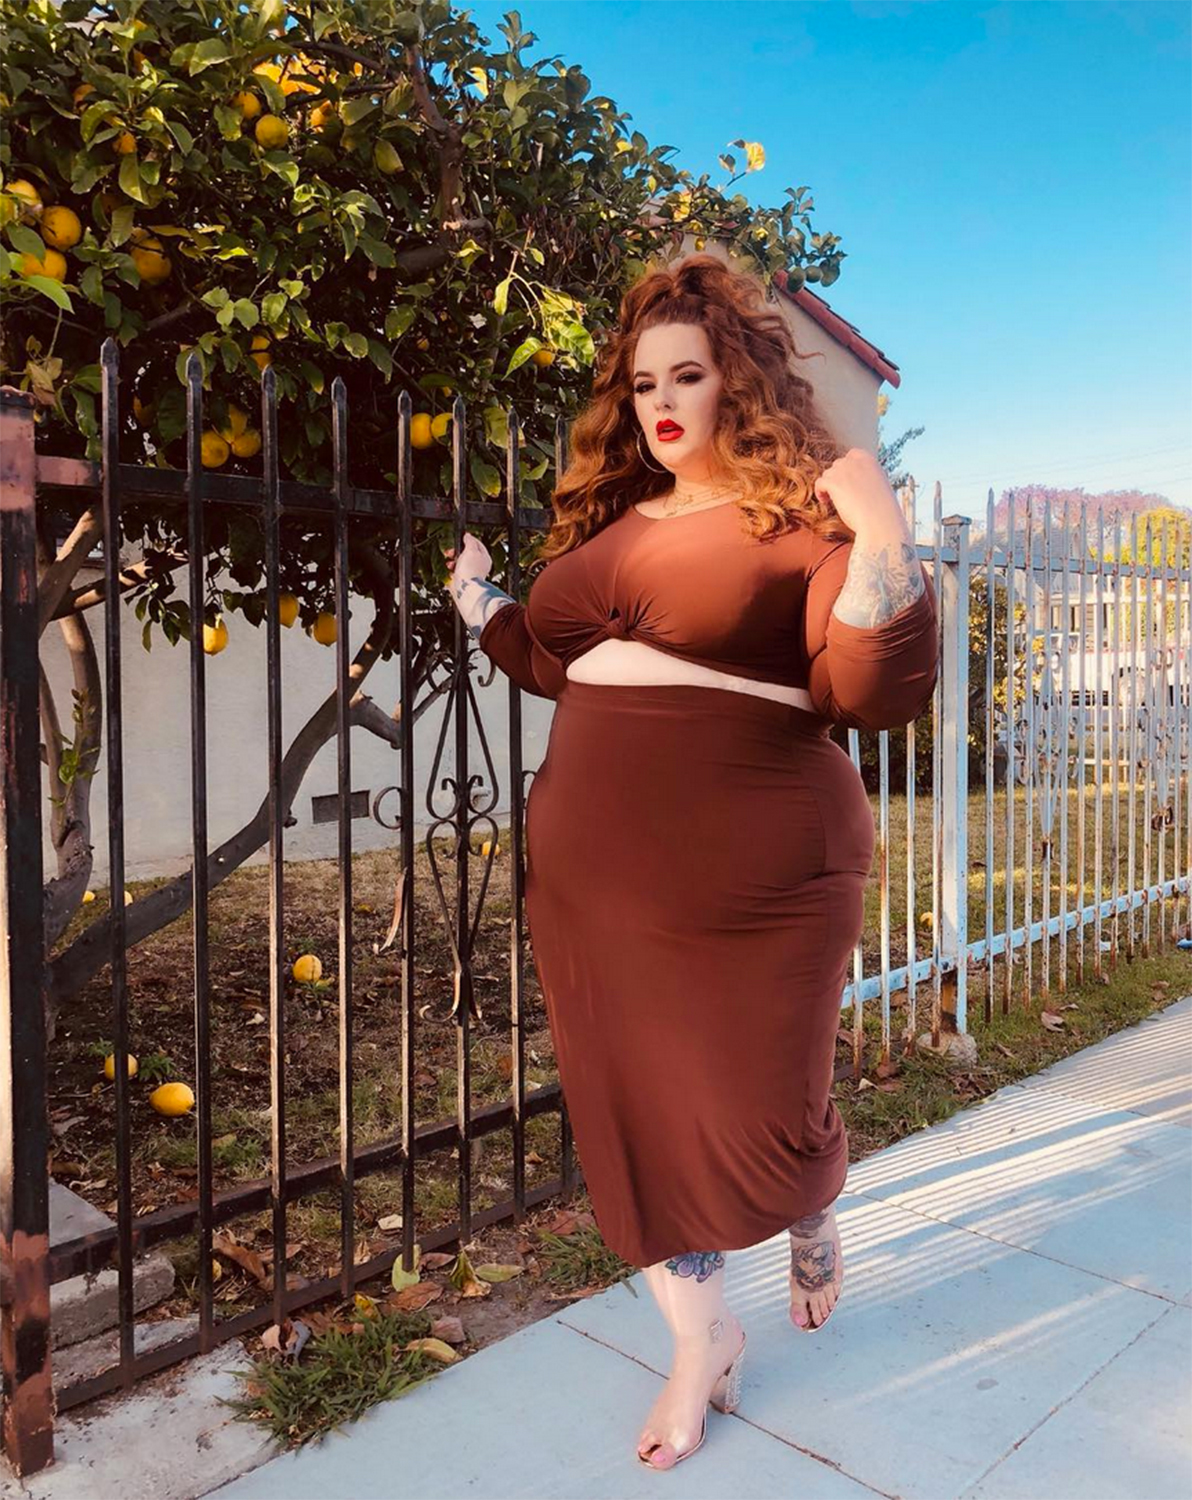 Tess Holliday Picture